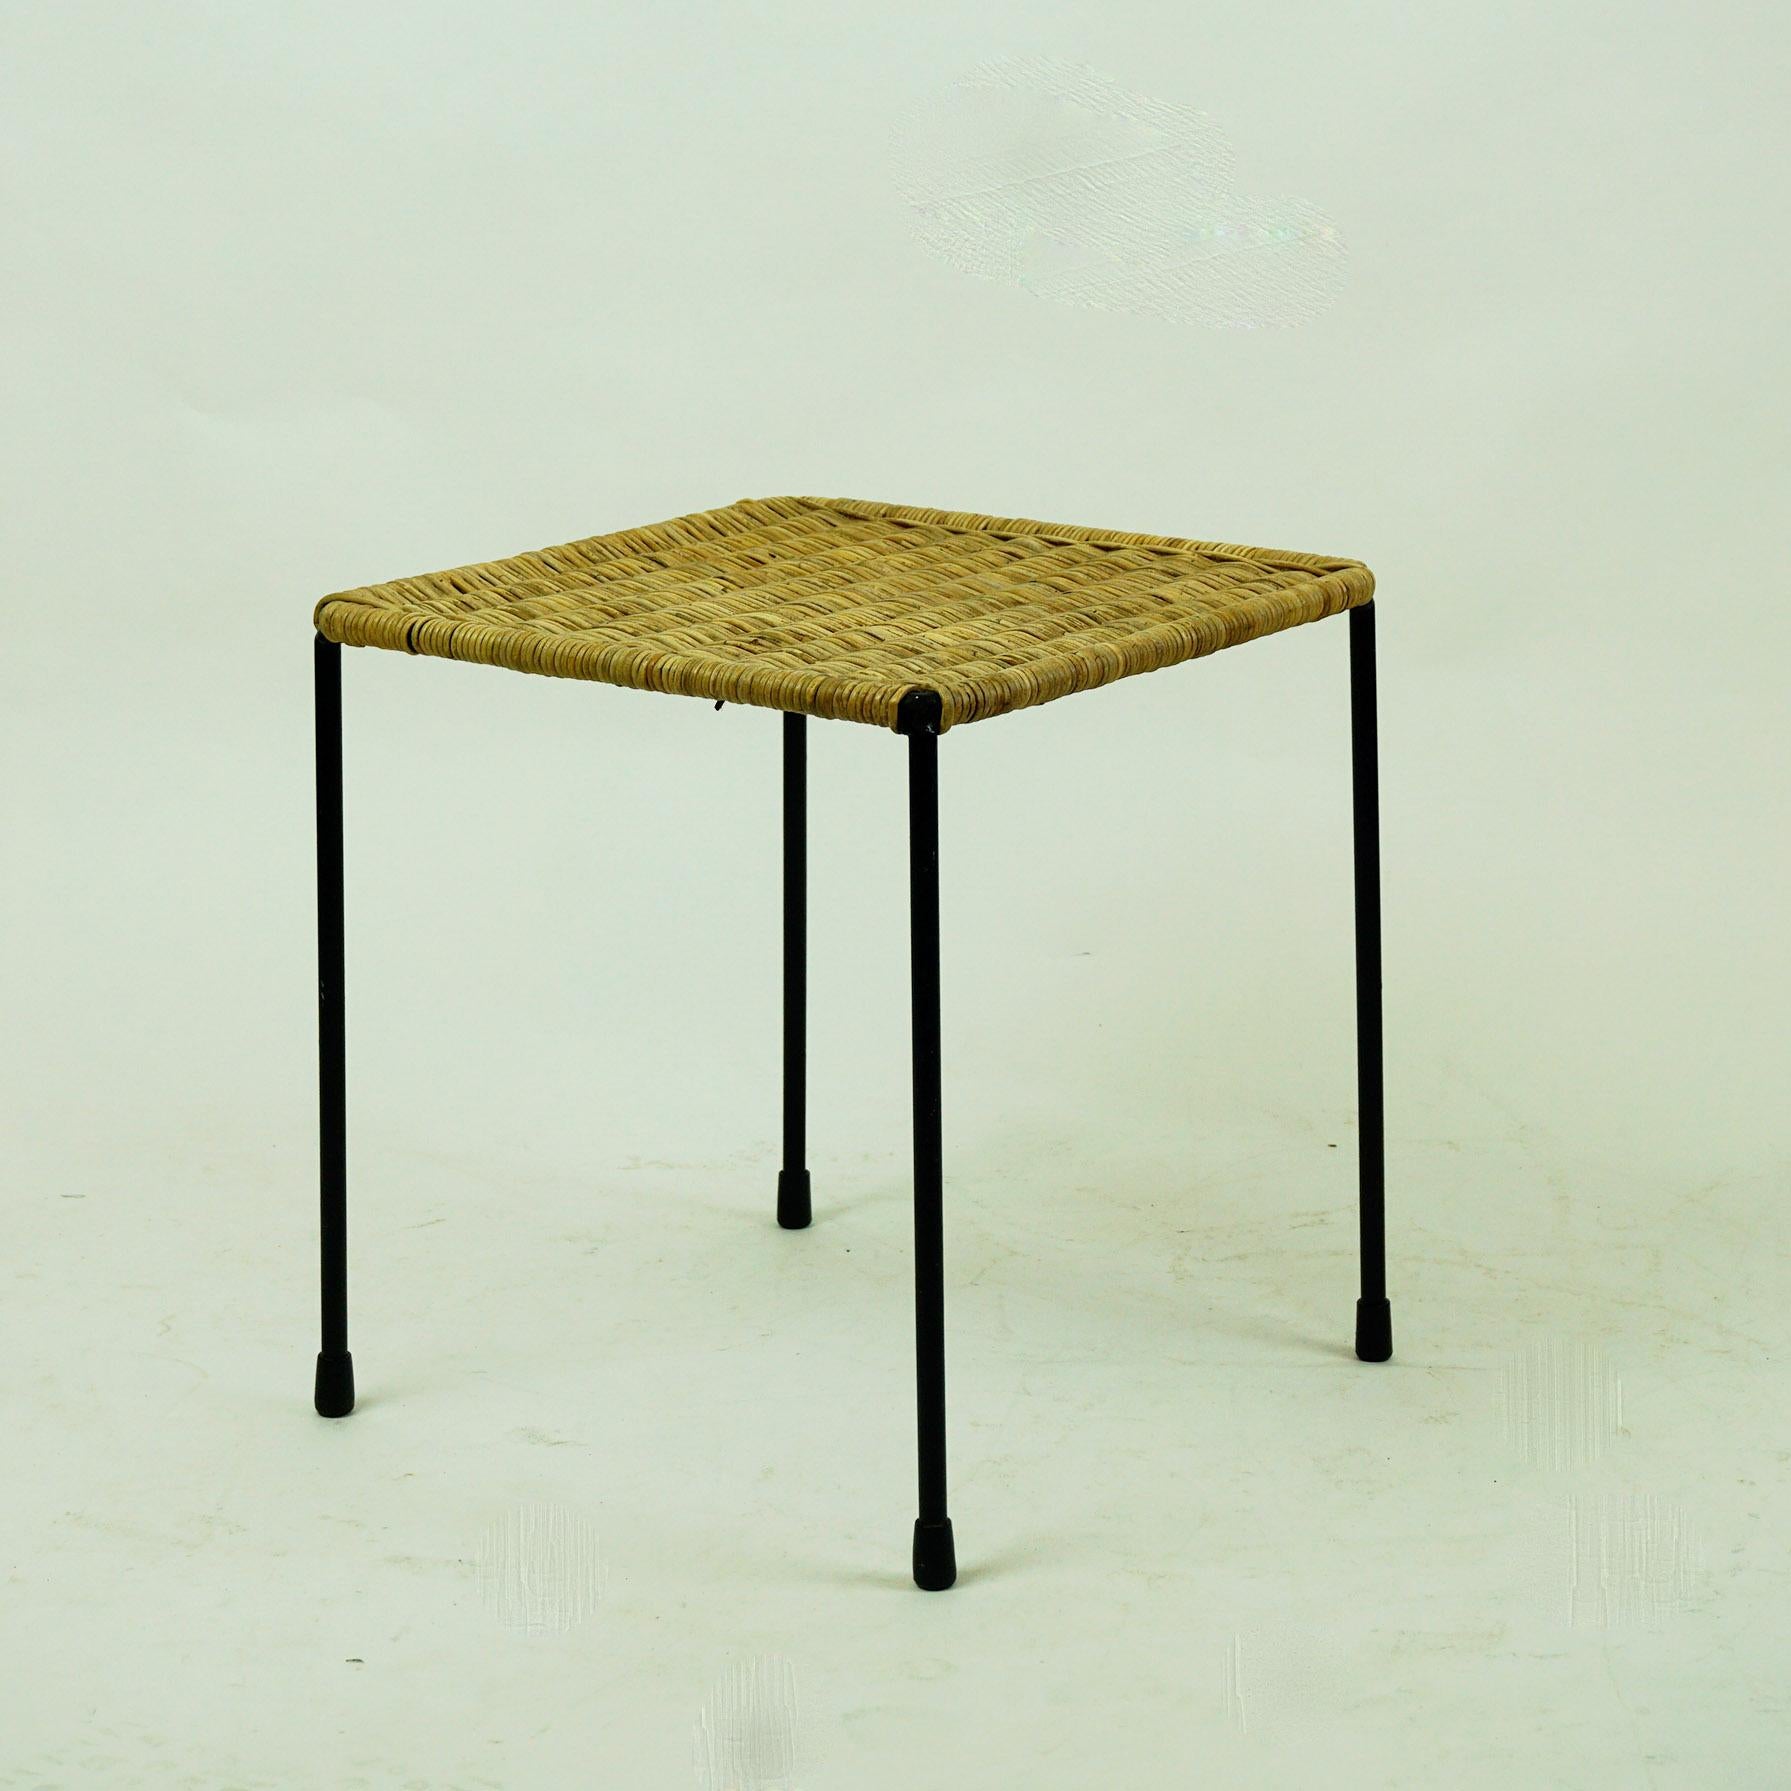 A charming small square sized table or stool designed and made by Carl Auböck II, Vienna, Austria, circa 1950 in beautiful original condition.
It´s frame is made from slender steel which has been lacquered in black and it has rubber shoes at the